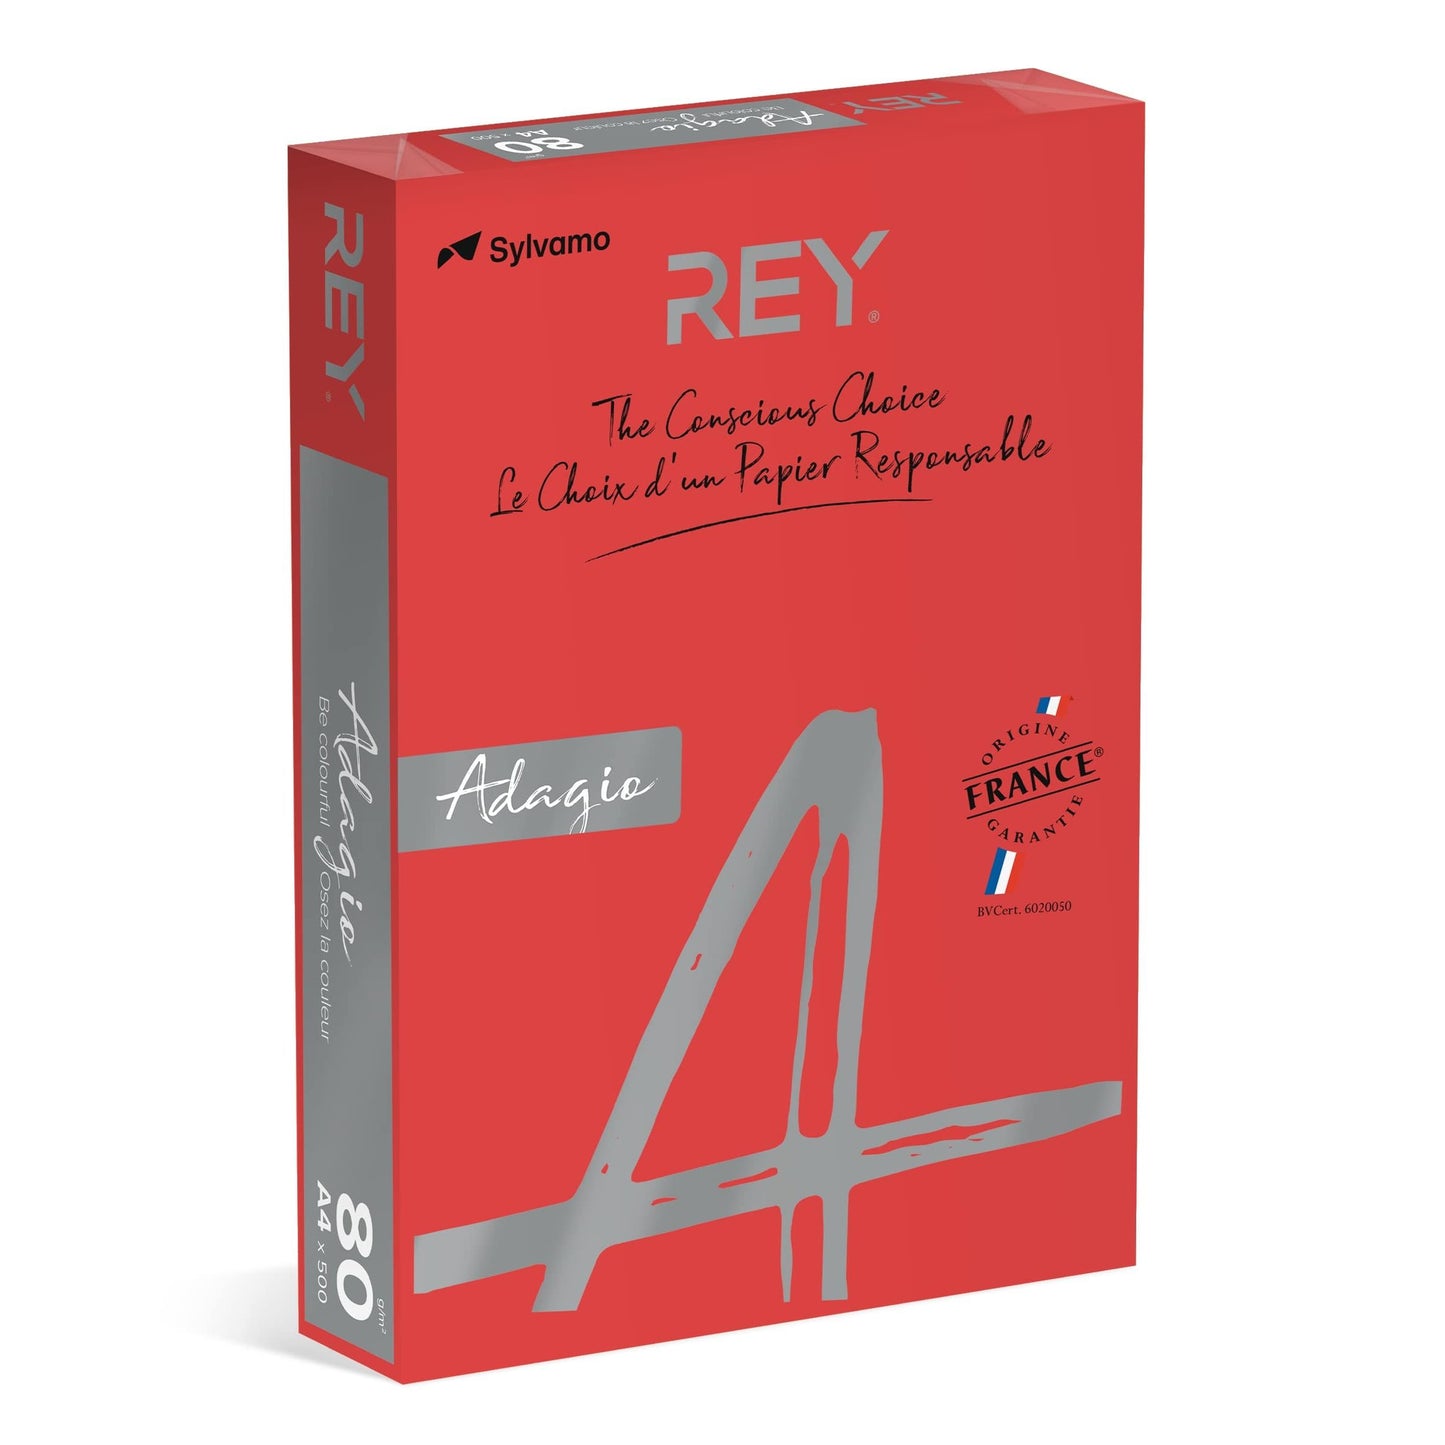 REY Adagio A4 Paper 80gsm Red Ream of 500 Sheets